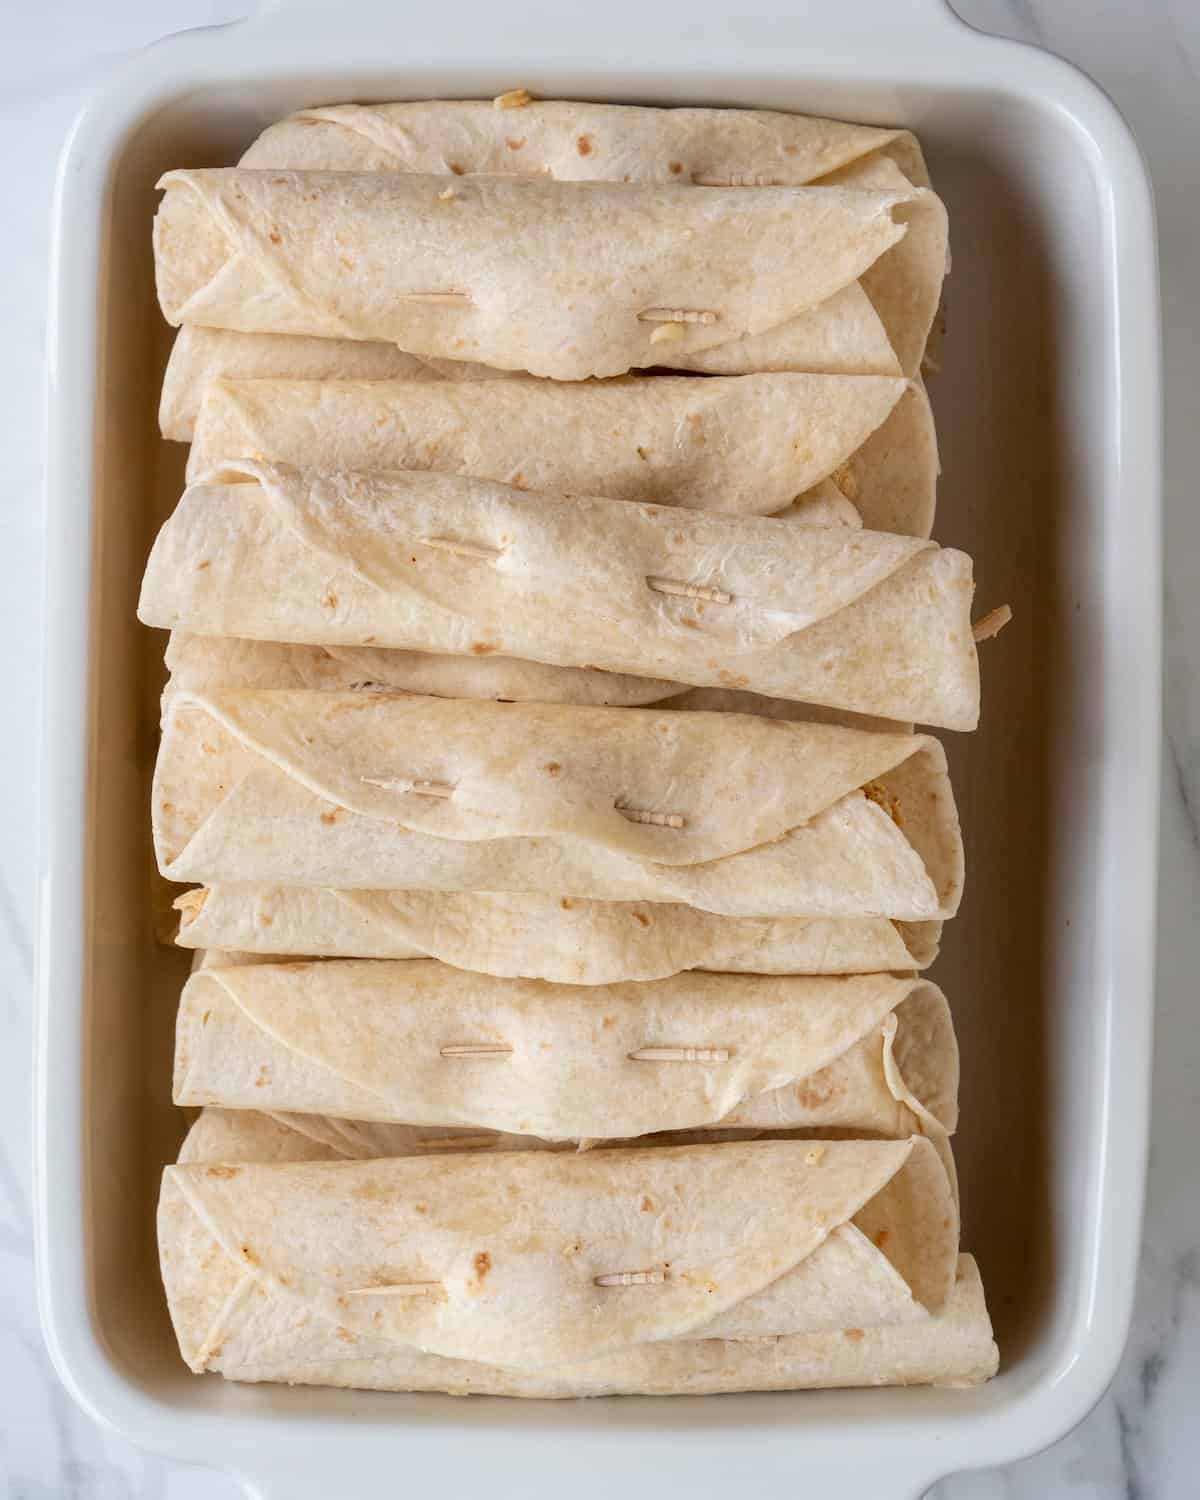 A baking dish with rolled tortillas filled with the chicken mixture, and secured with a toothpick weaved through the overlapping part to seal them, several rolled tortillas placed one on top of the other.